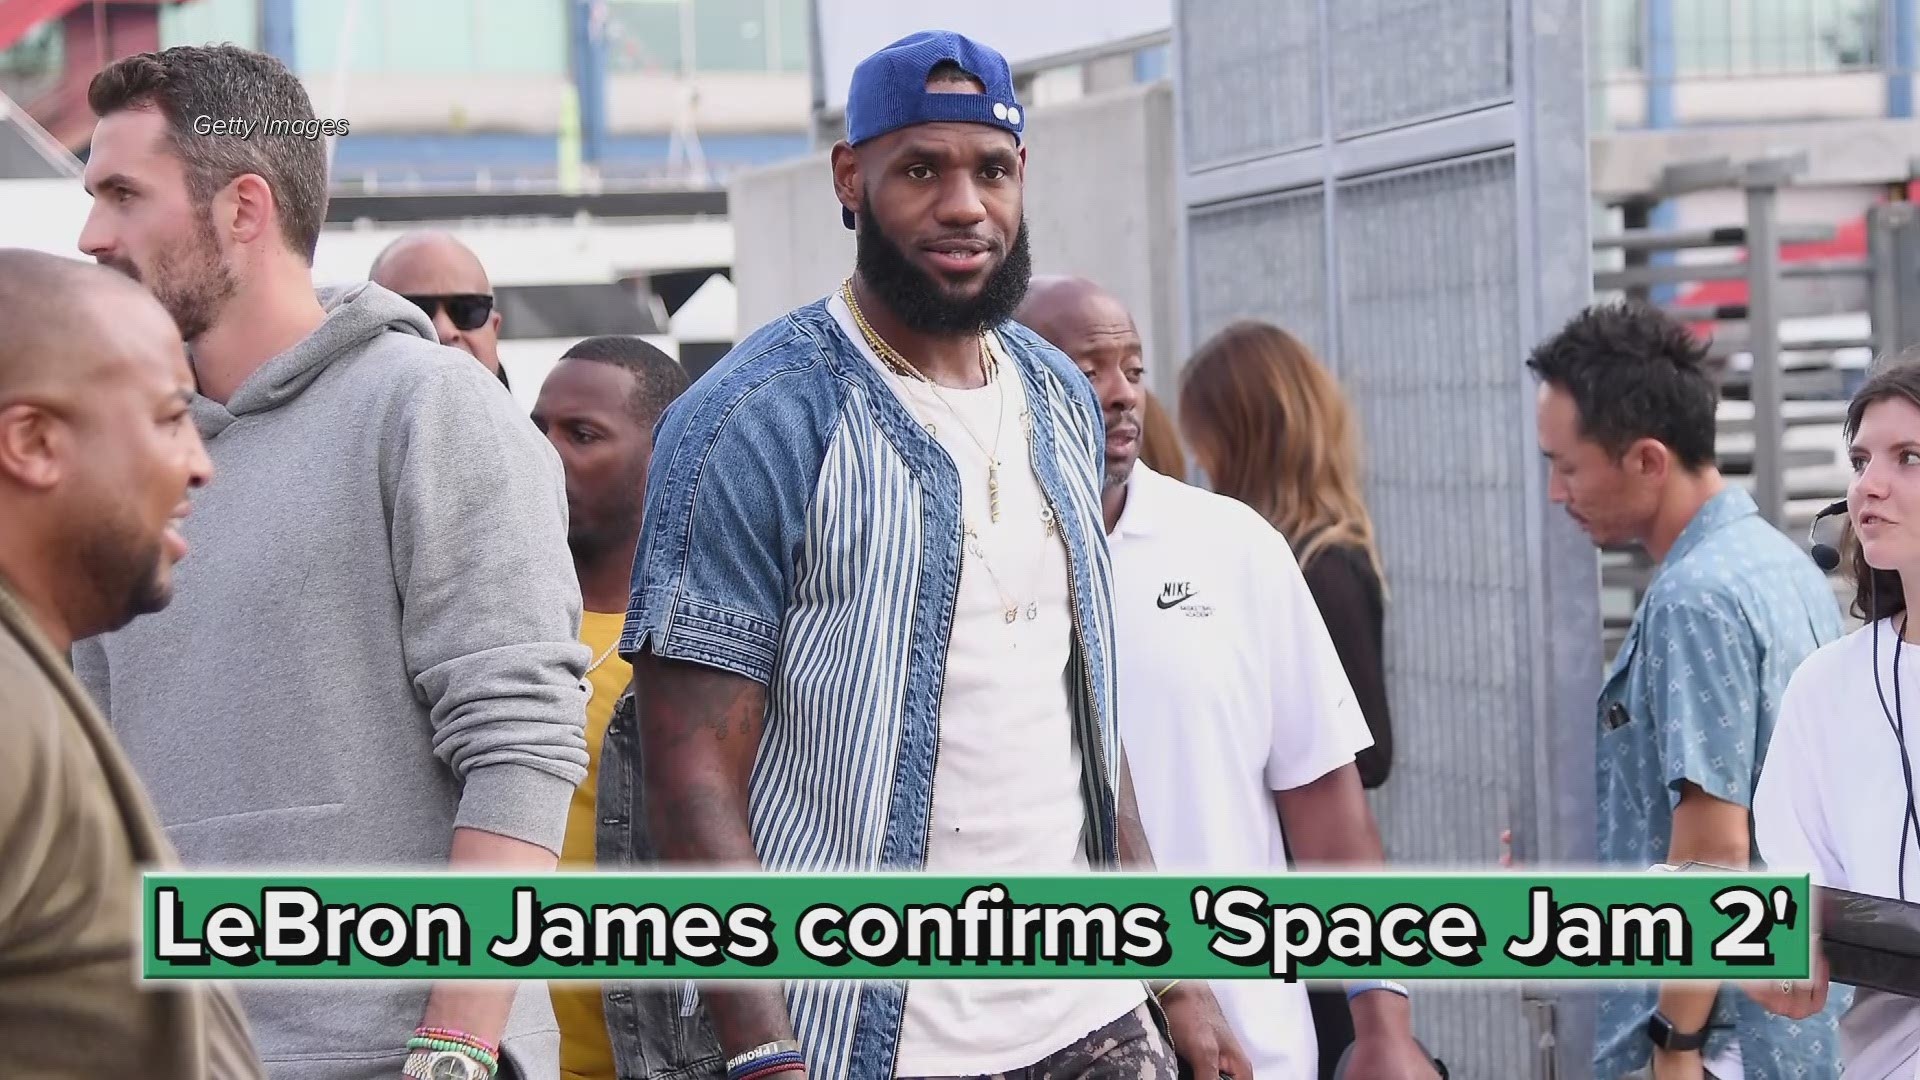 Space Jam 2 Teaser Reveals LeBron James' New Tune Squad Jersey